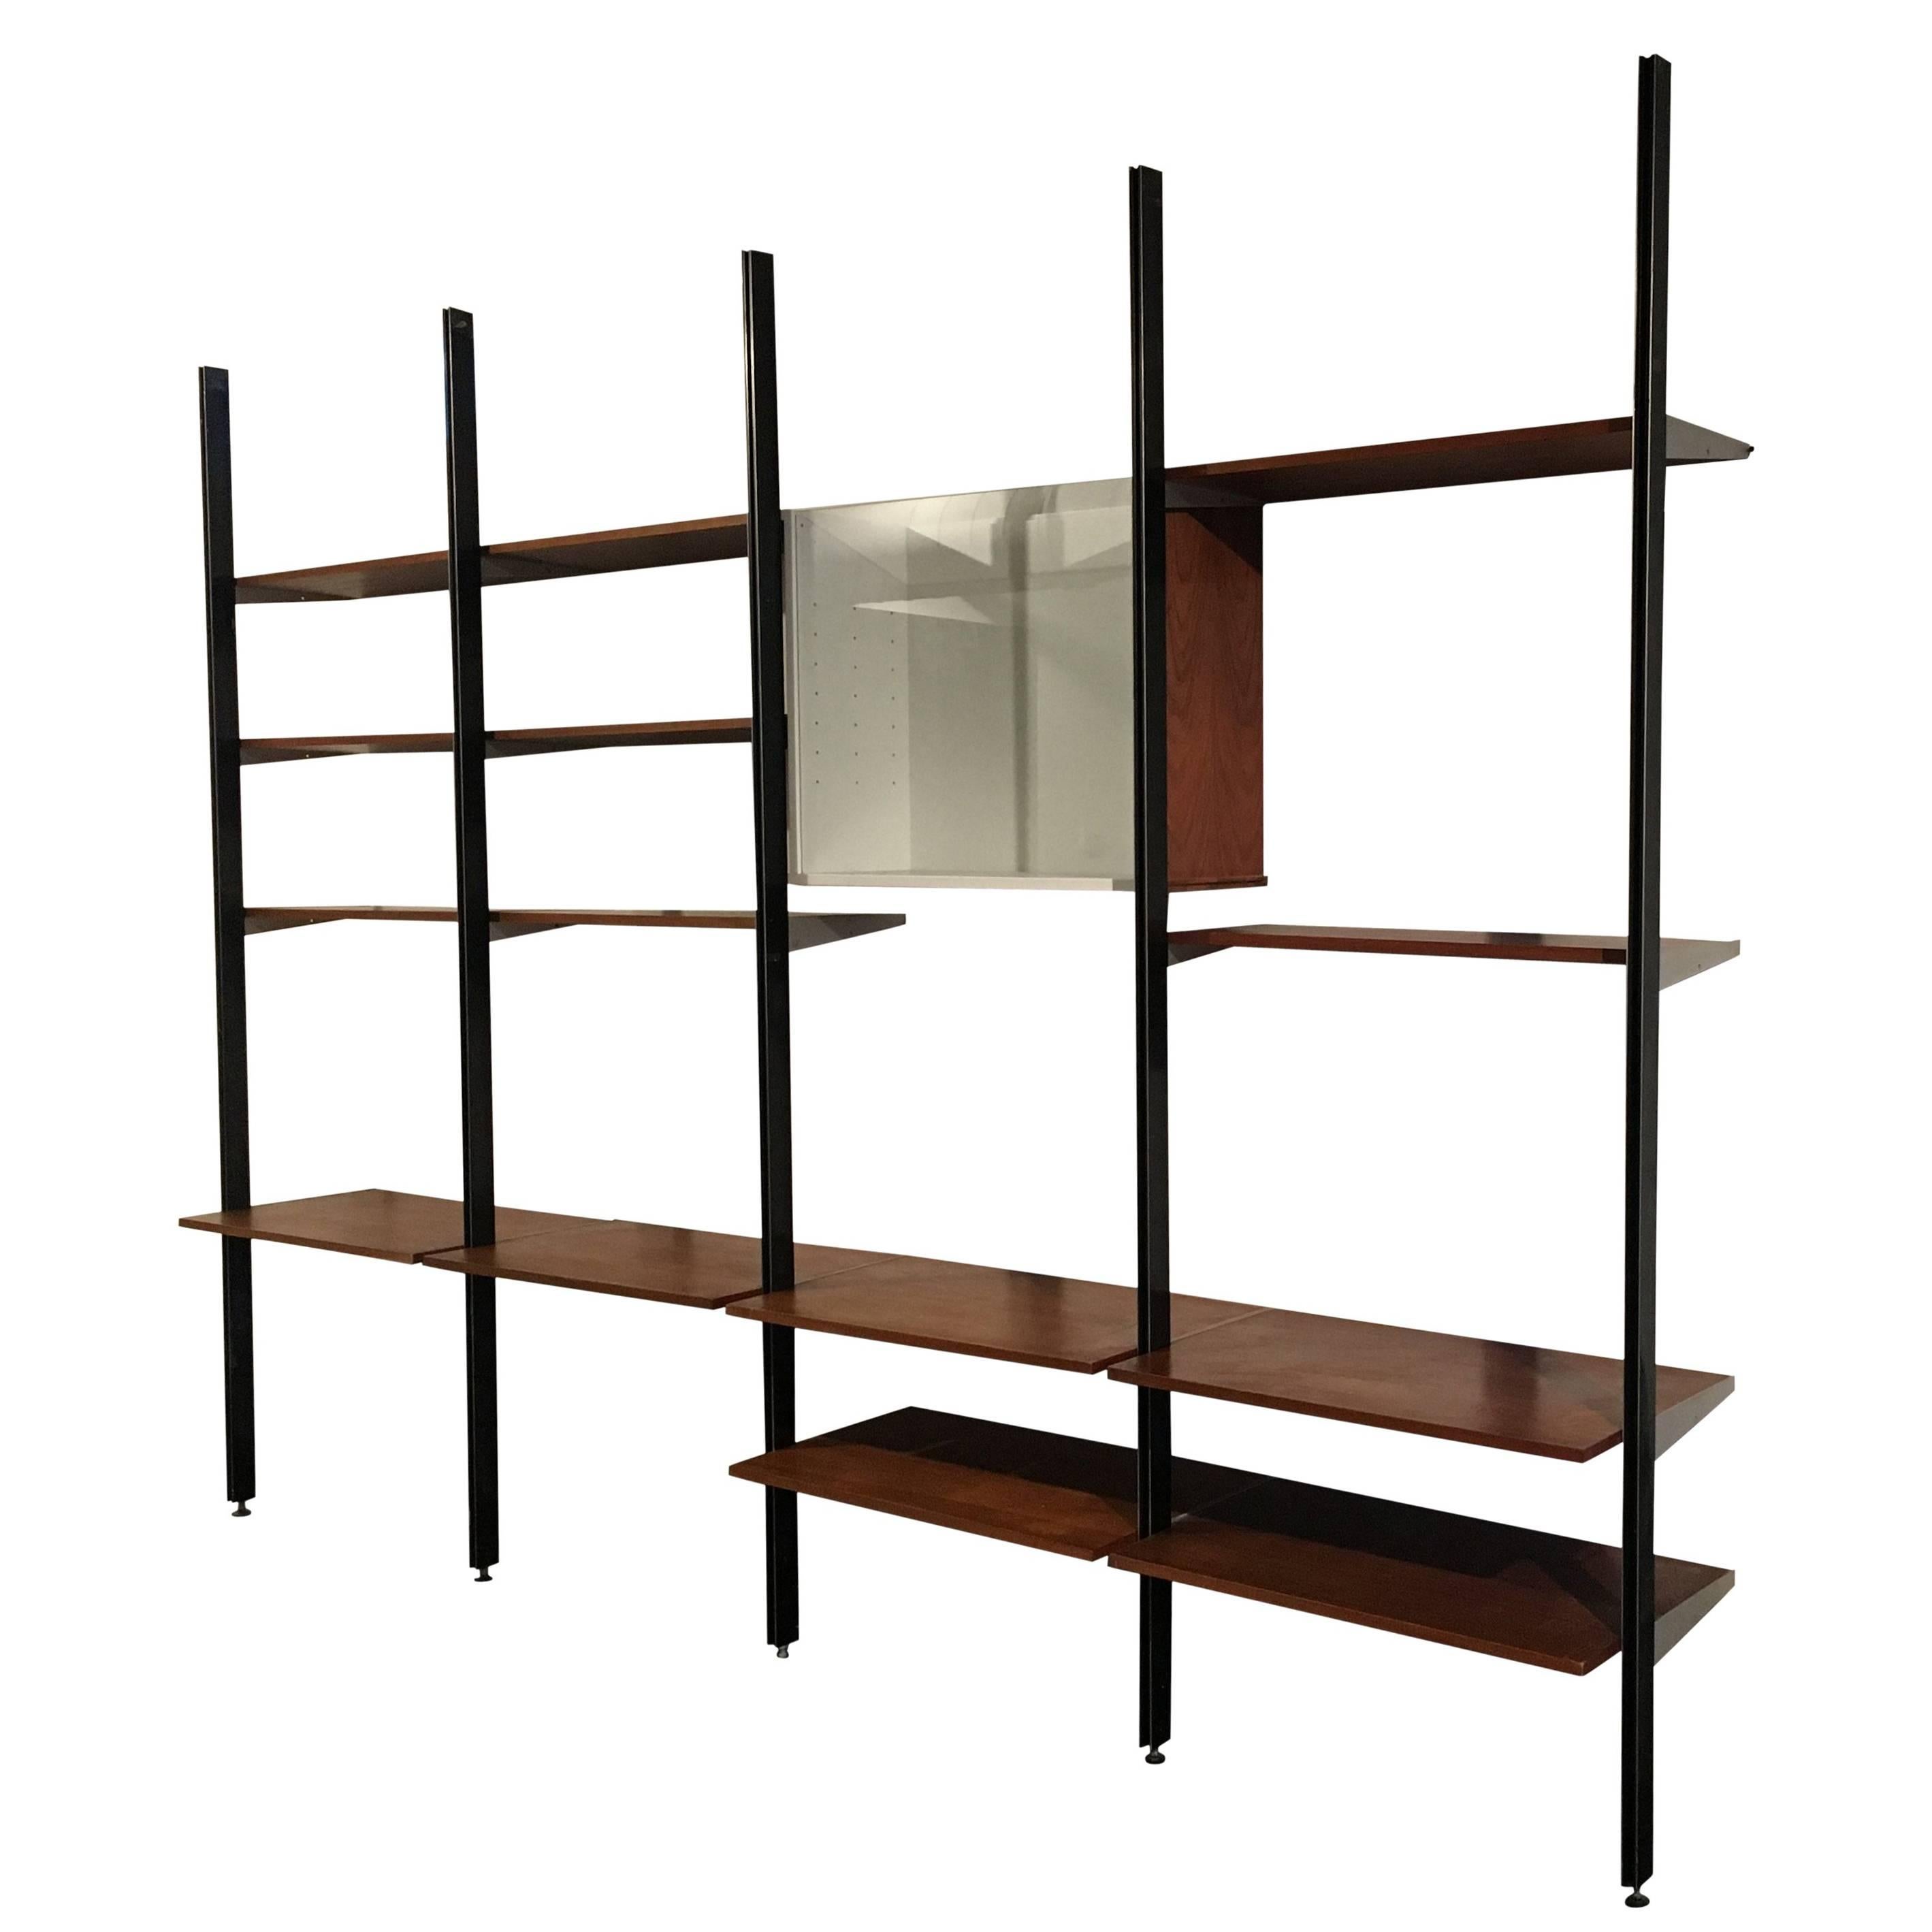 George Nelson Four Bay CSS Shelving Unit, Herman Miller, 1960